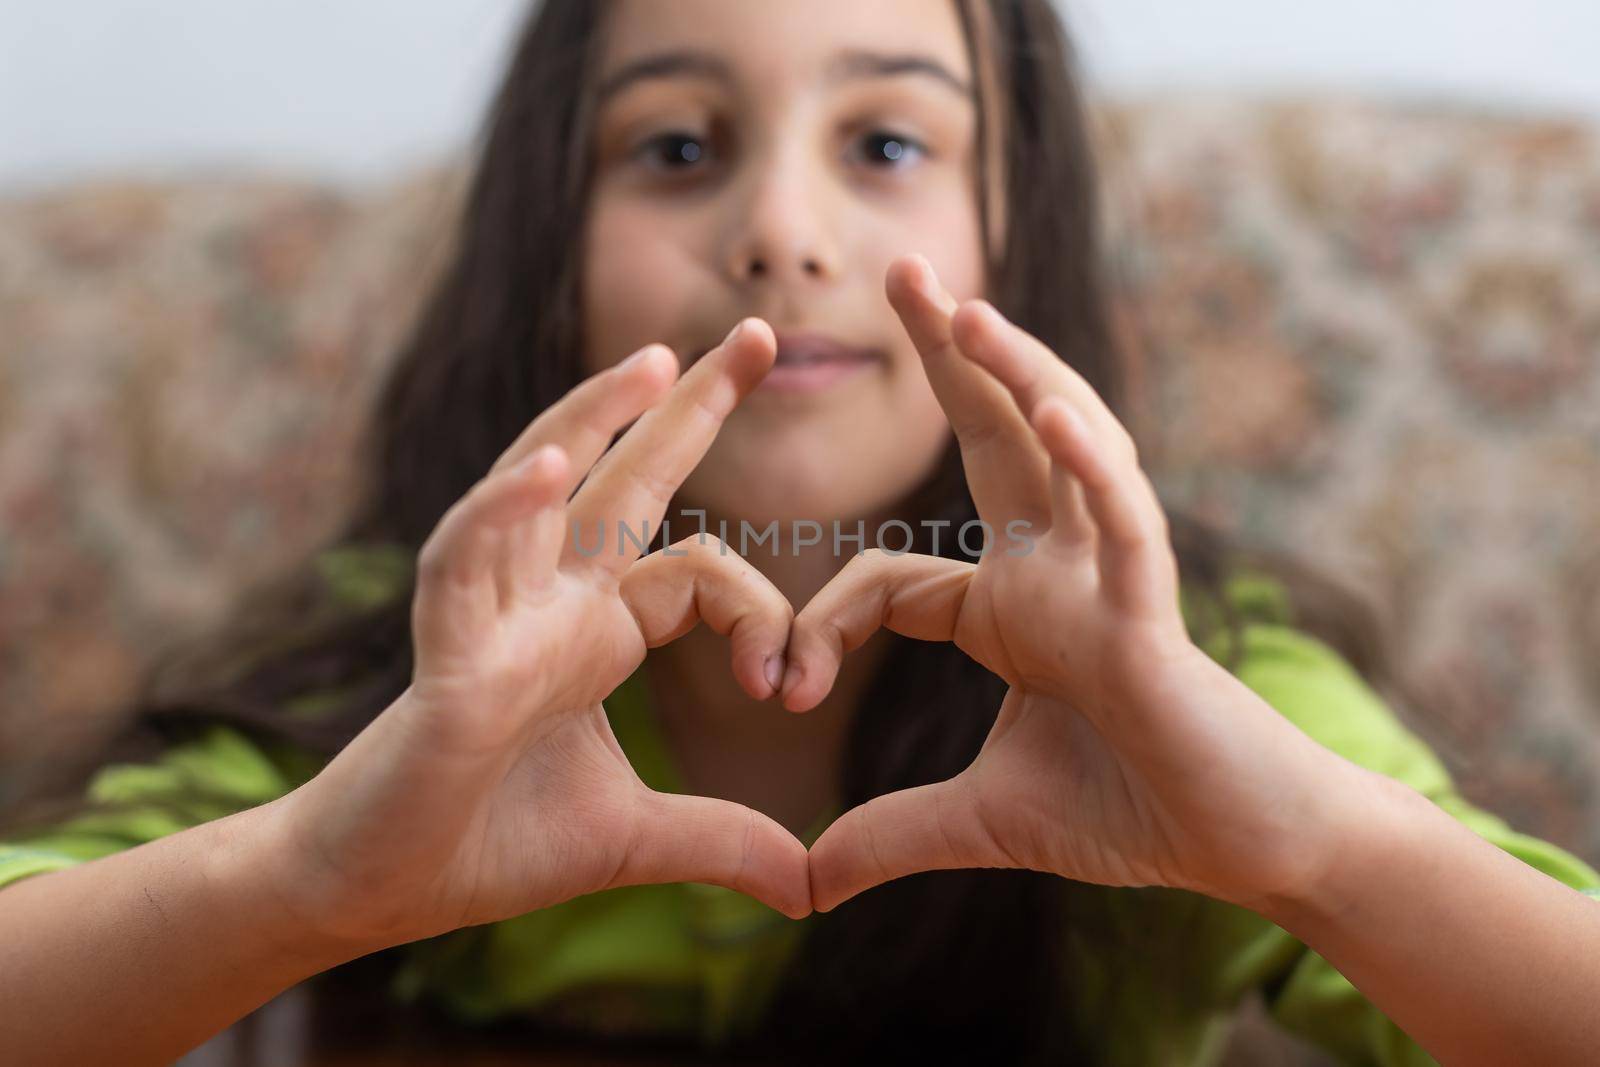 A cute Caucasian child holds a palm in the shape of a heart